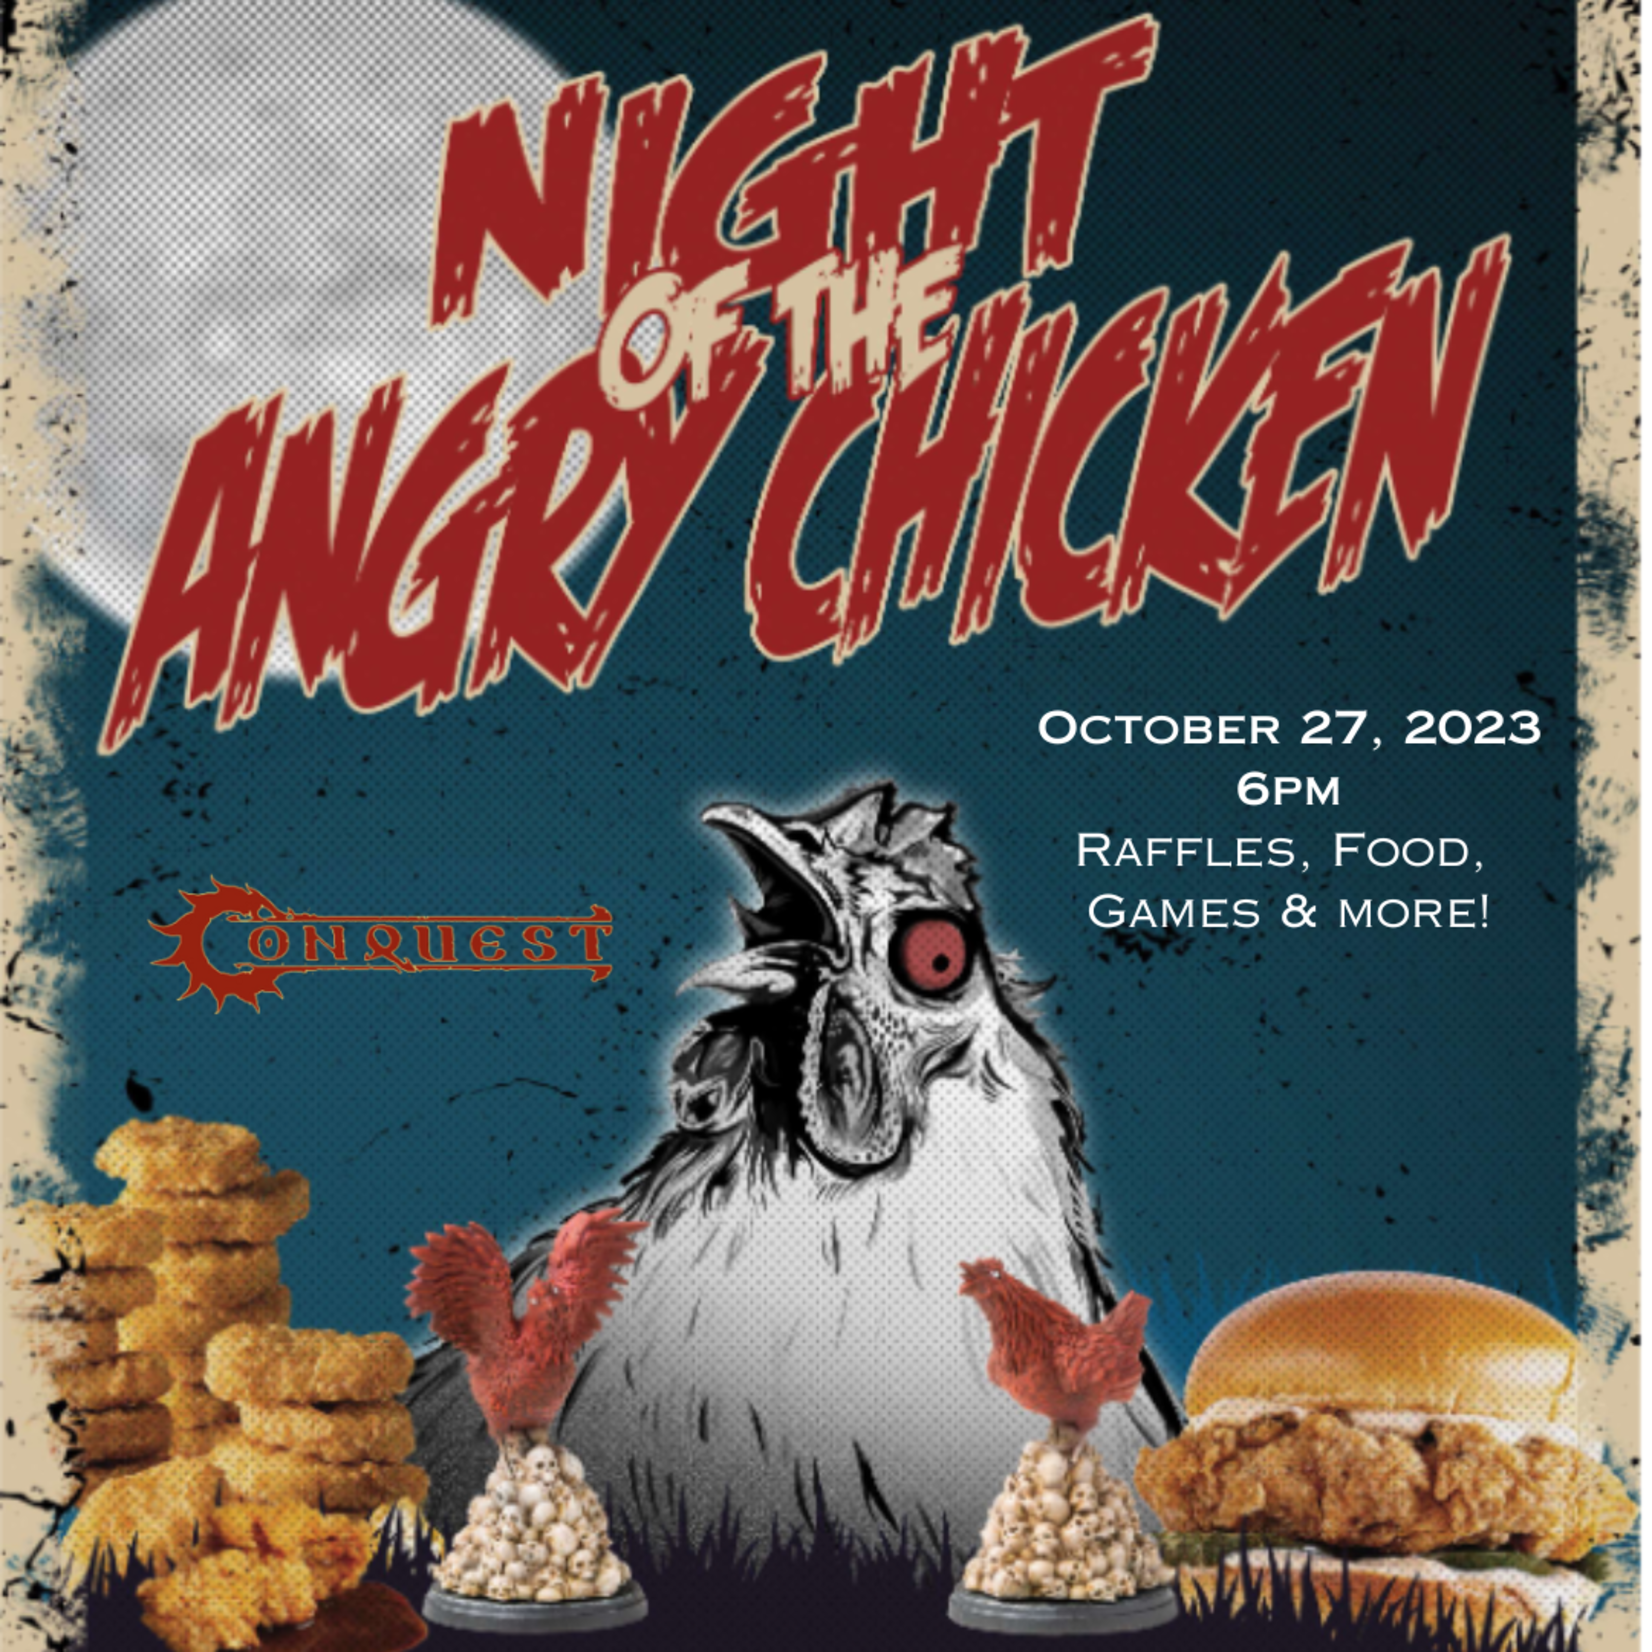 10/28/23 - Night of the Angry Chicken